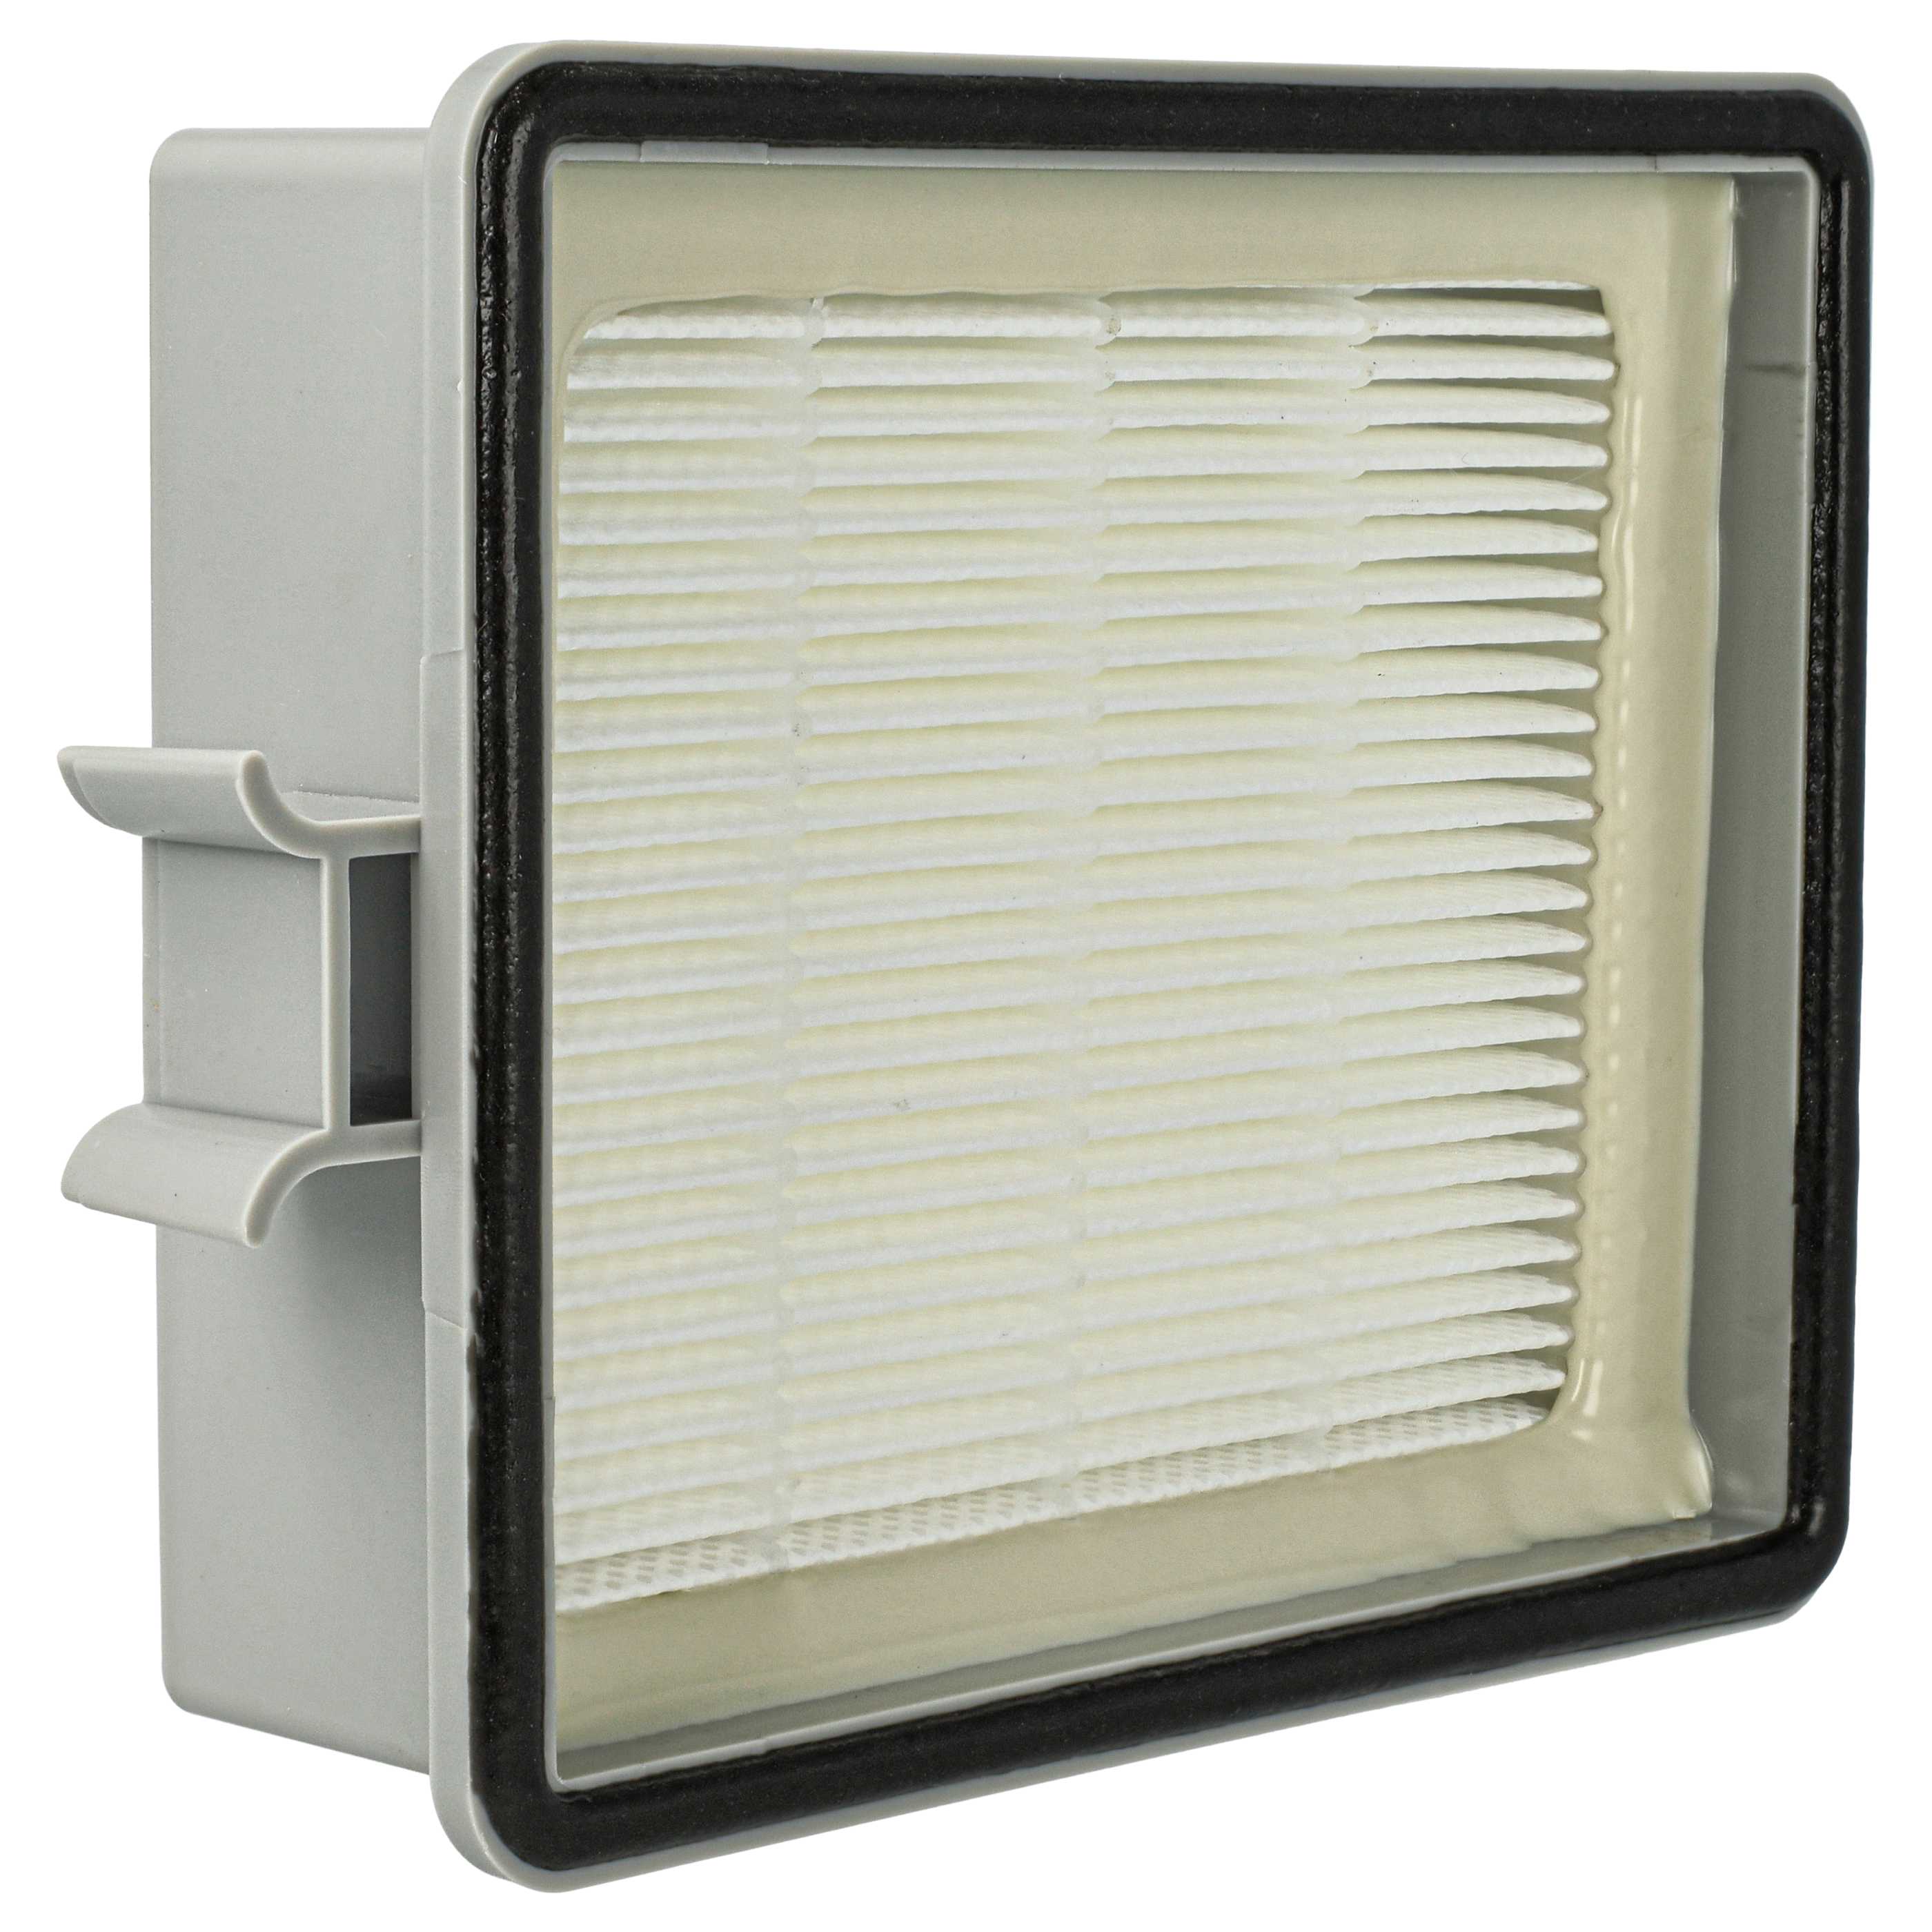 1x post-motor HEPA-filter suitable for Lux Intelligence / S 115 for LuxVacuum Cleaner